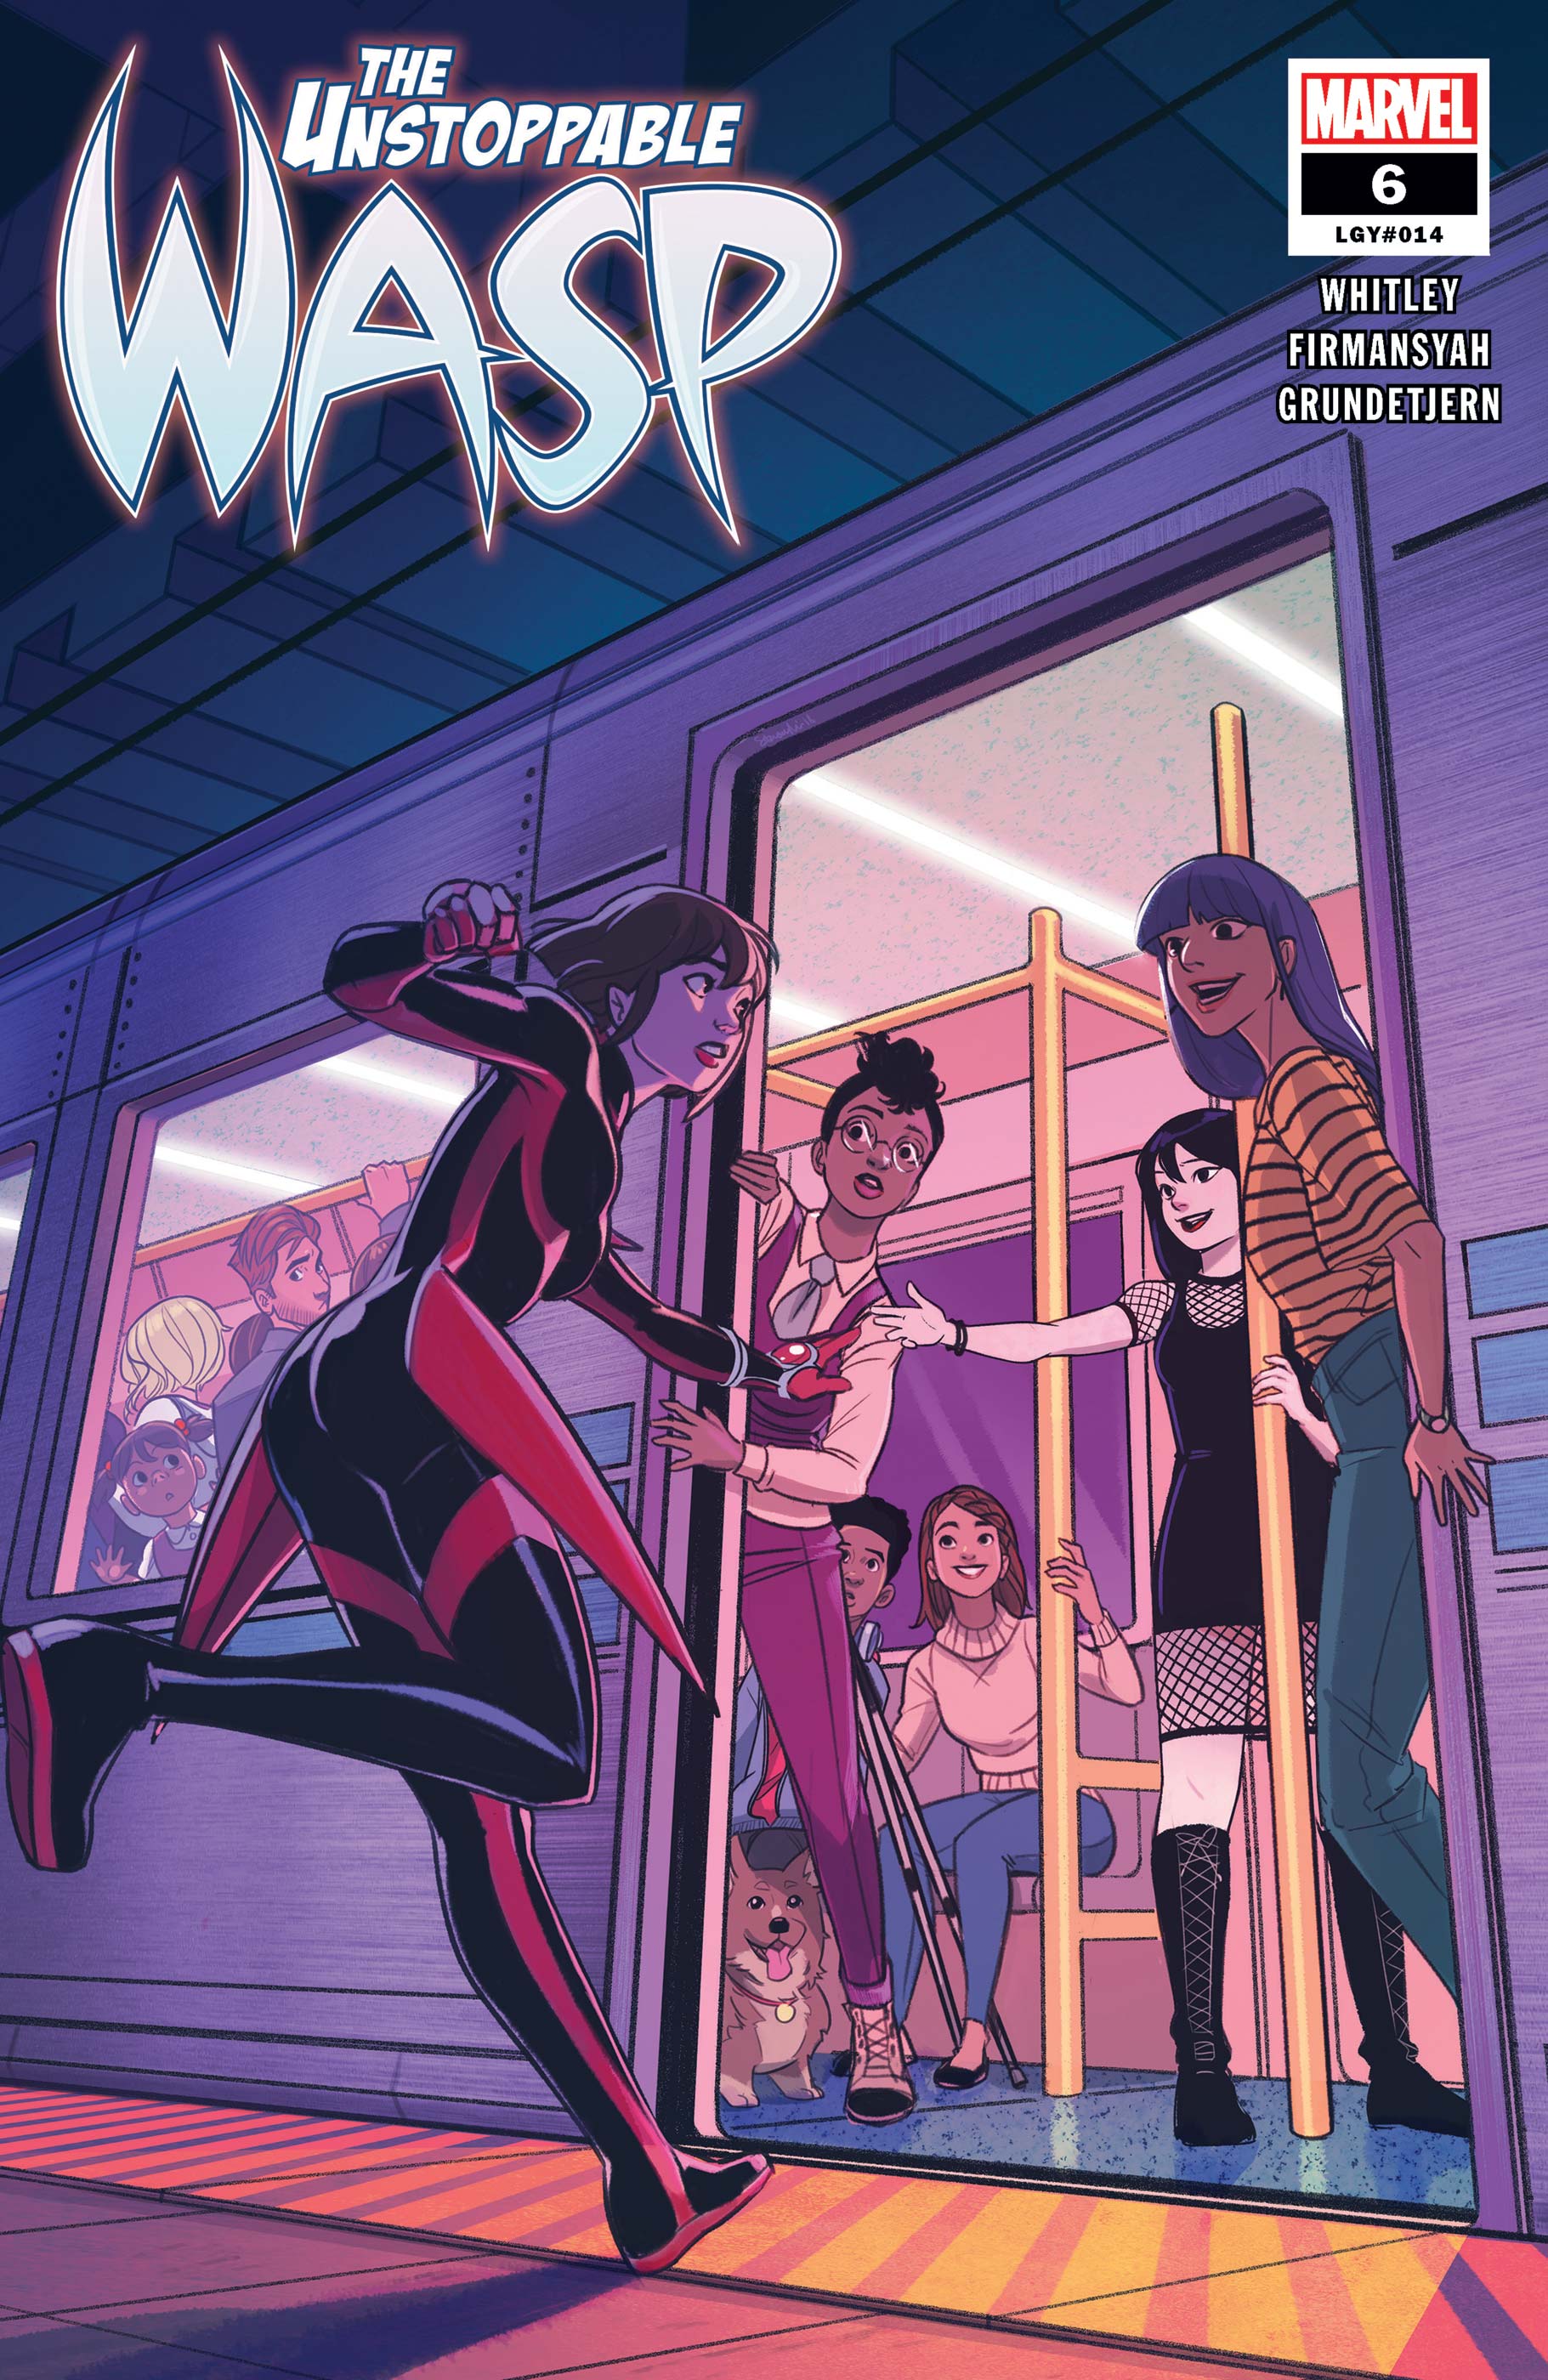 The Unstoppable Wasp (2018) #6